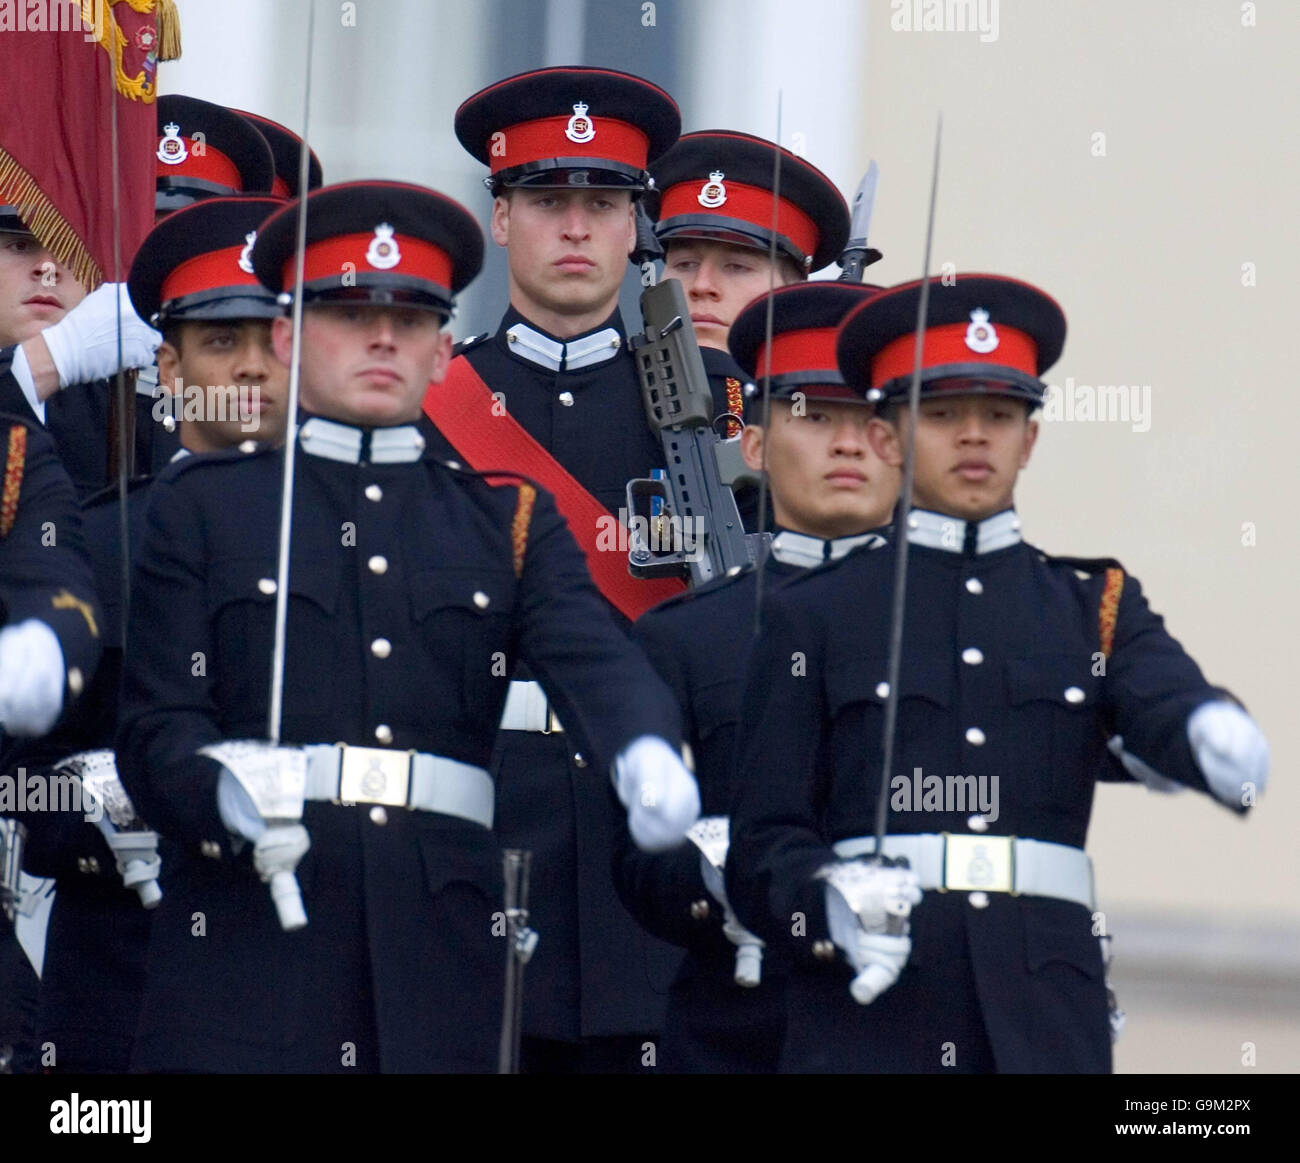 Prince William passing out at Sandhurst Stock Photo - Alamy